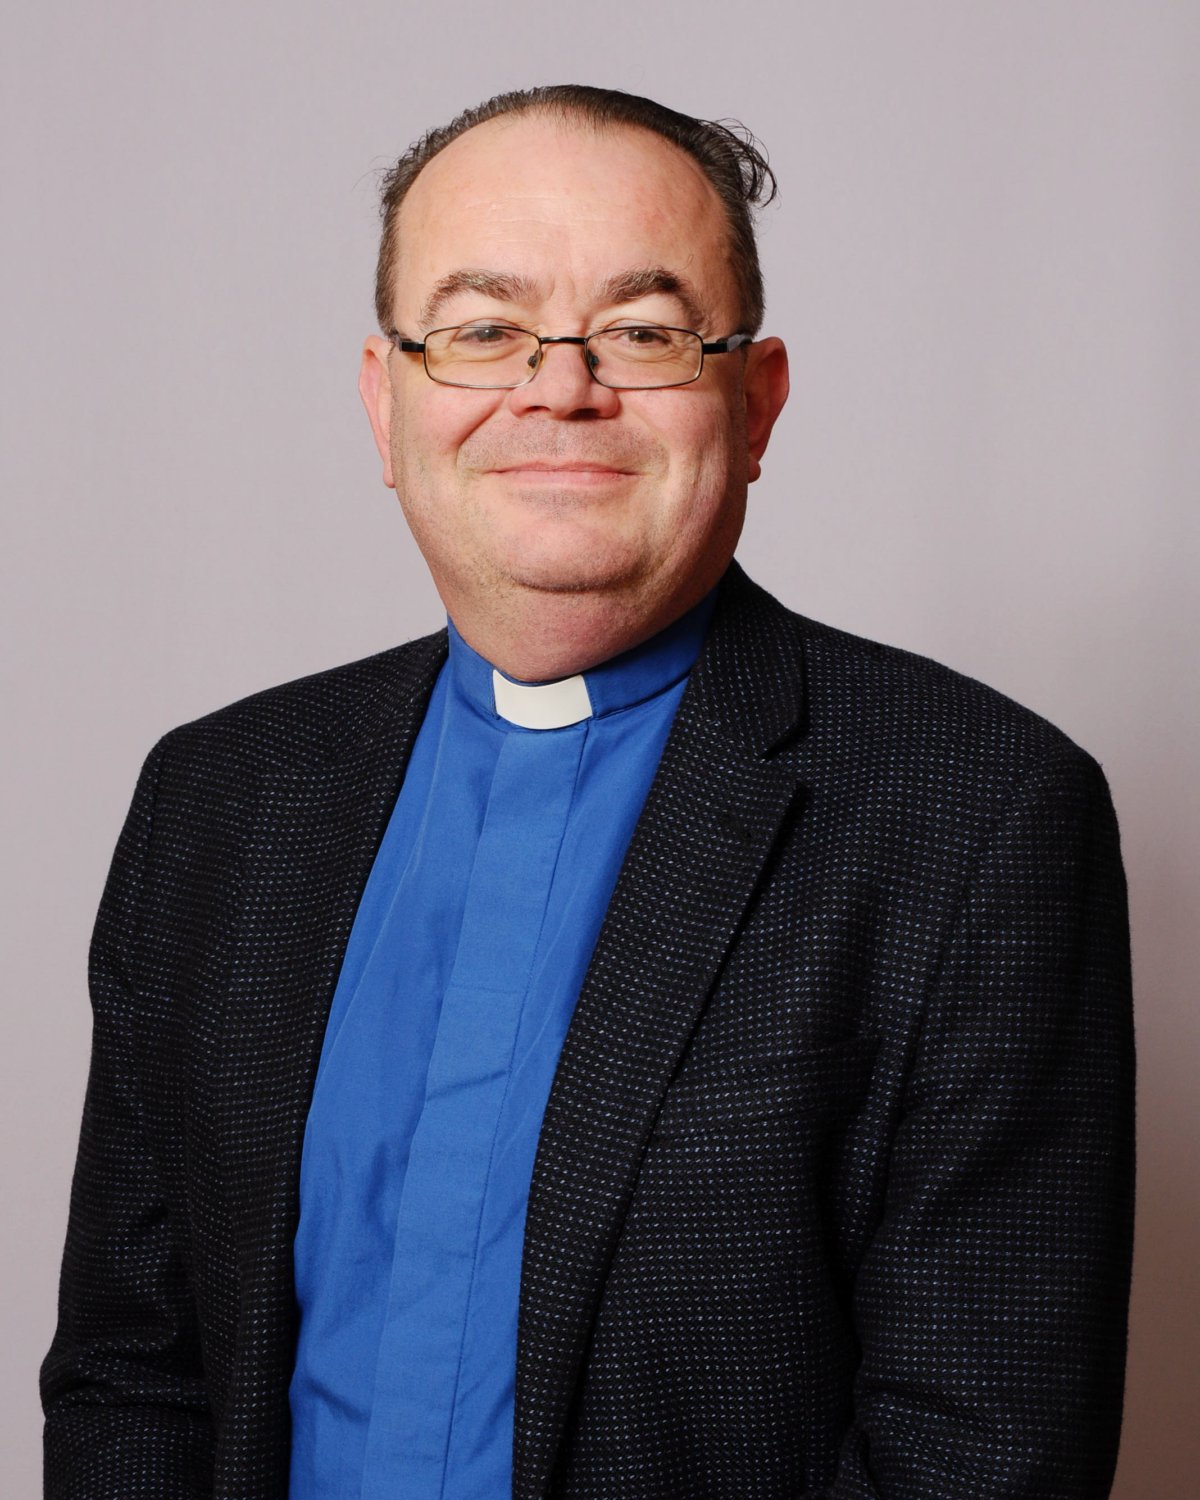 Rev. David Tolhurst - Trustee (Safeguarding link)
Date of appointment - 1 February 2023
Term of office - 4 years
Appointed by academy members